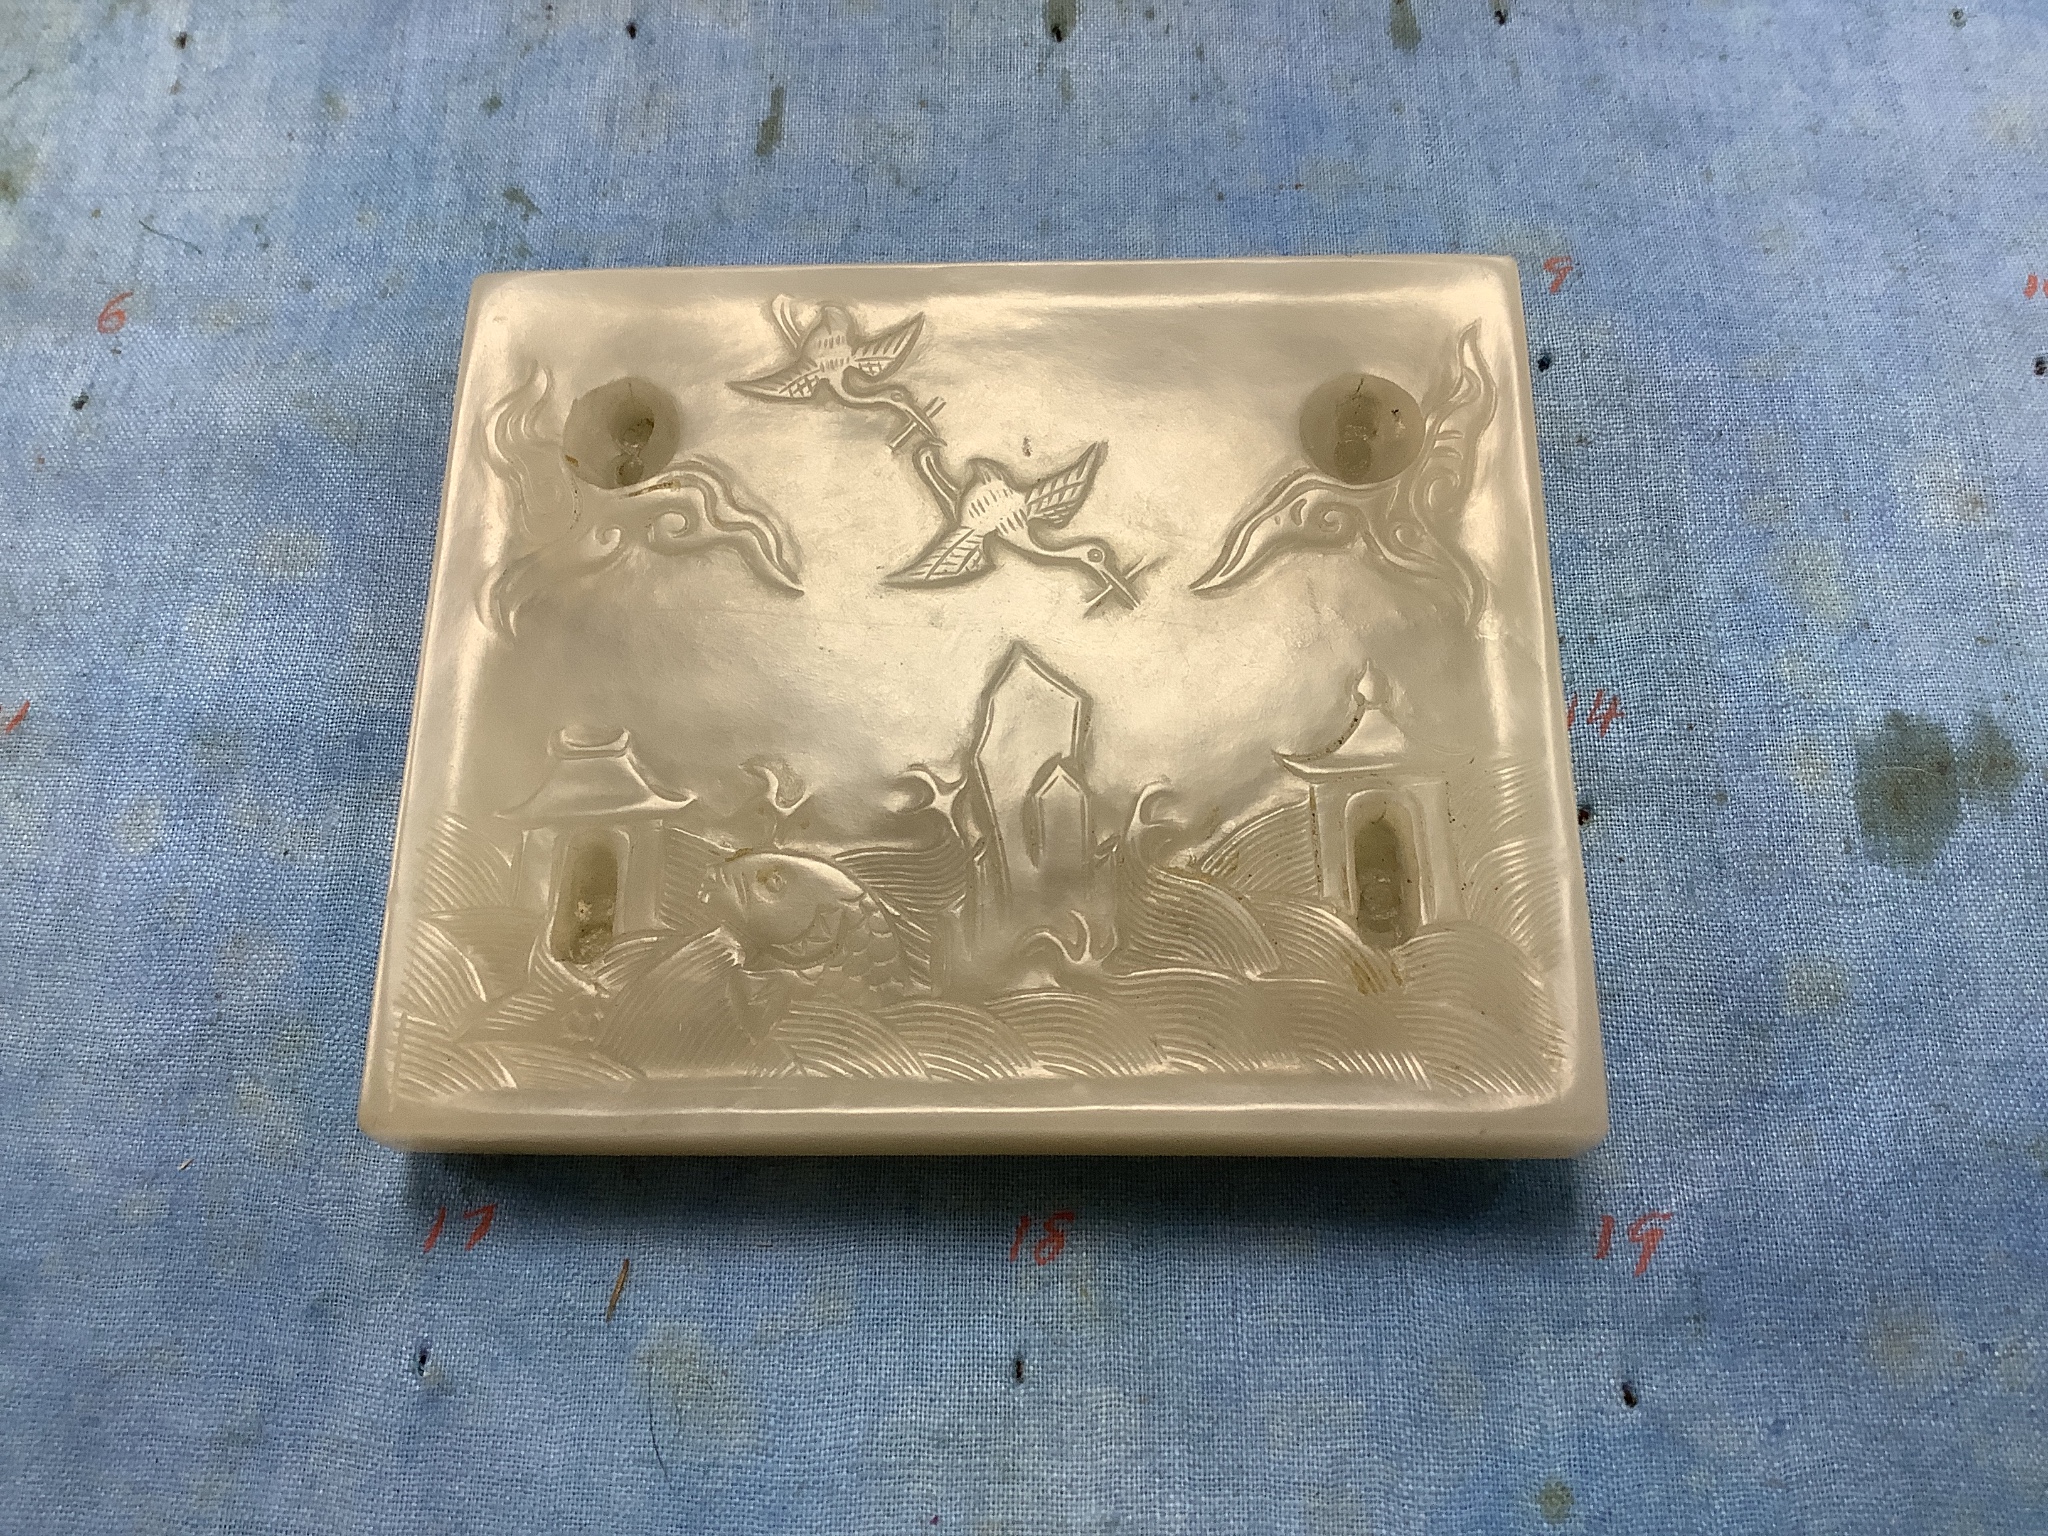 An unusual Chinese white jade plaque, 18th/19th century, 6.7cm x 8.1cm, wood stand